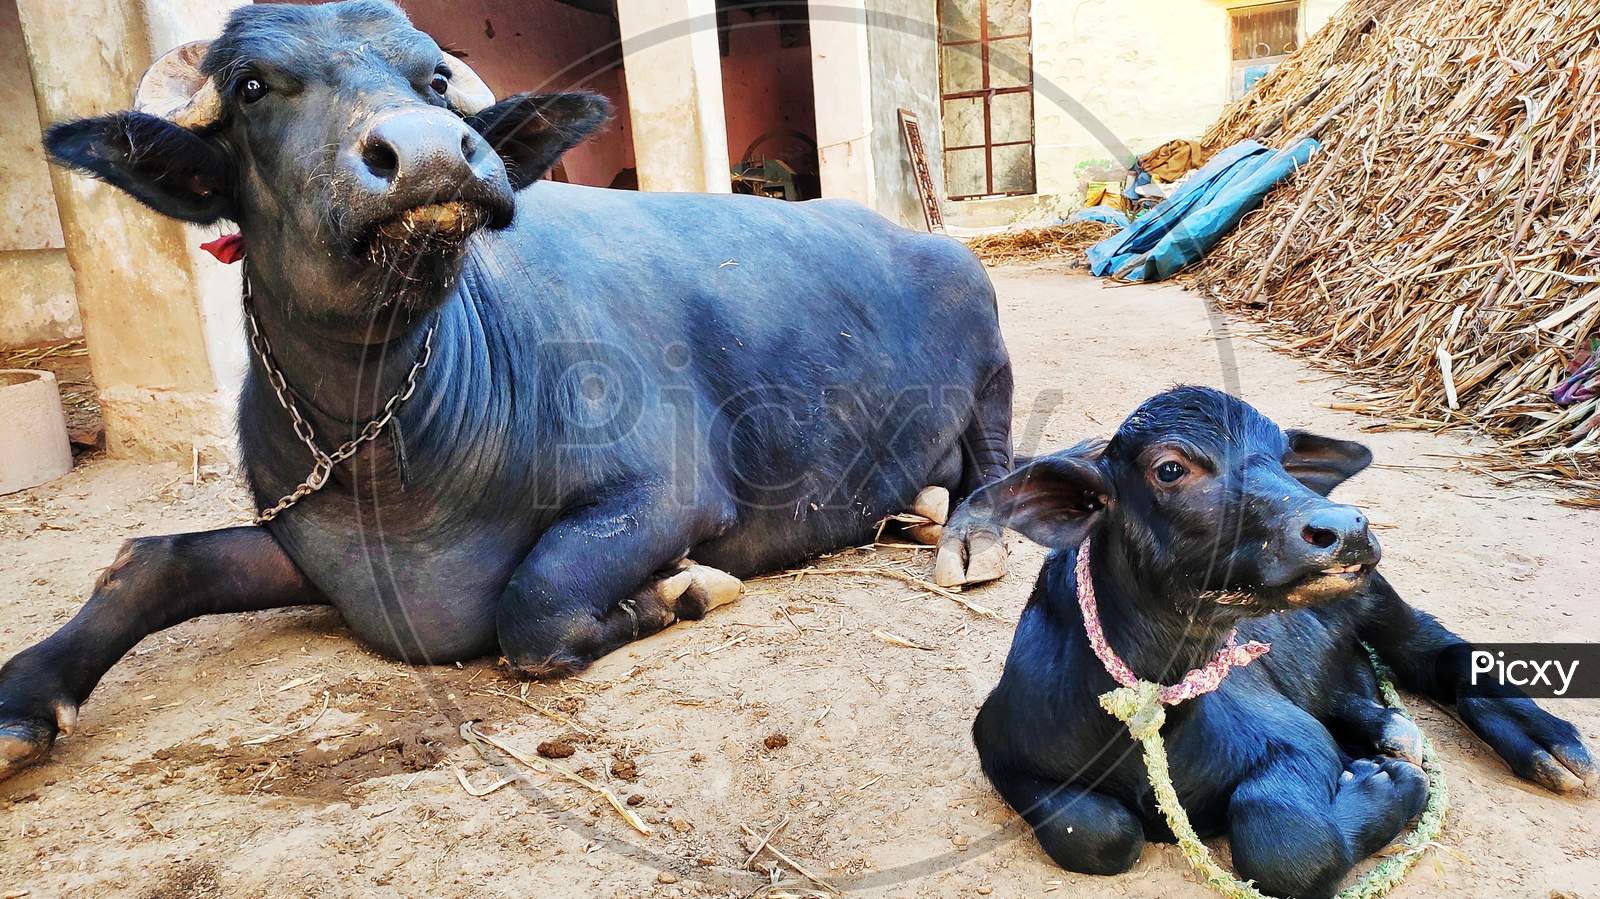 A mother and her new born cute baby Buffalo